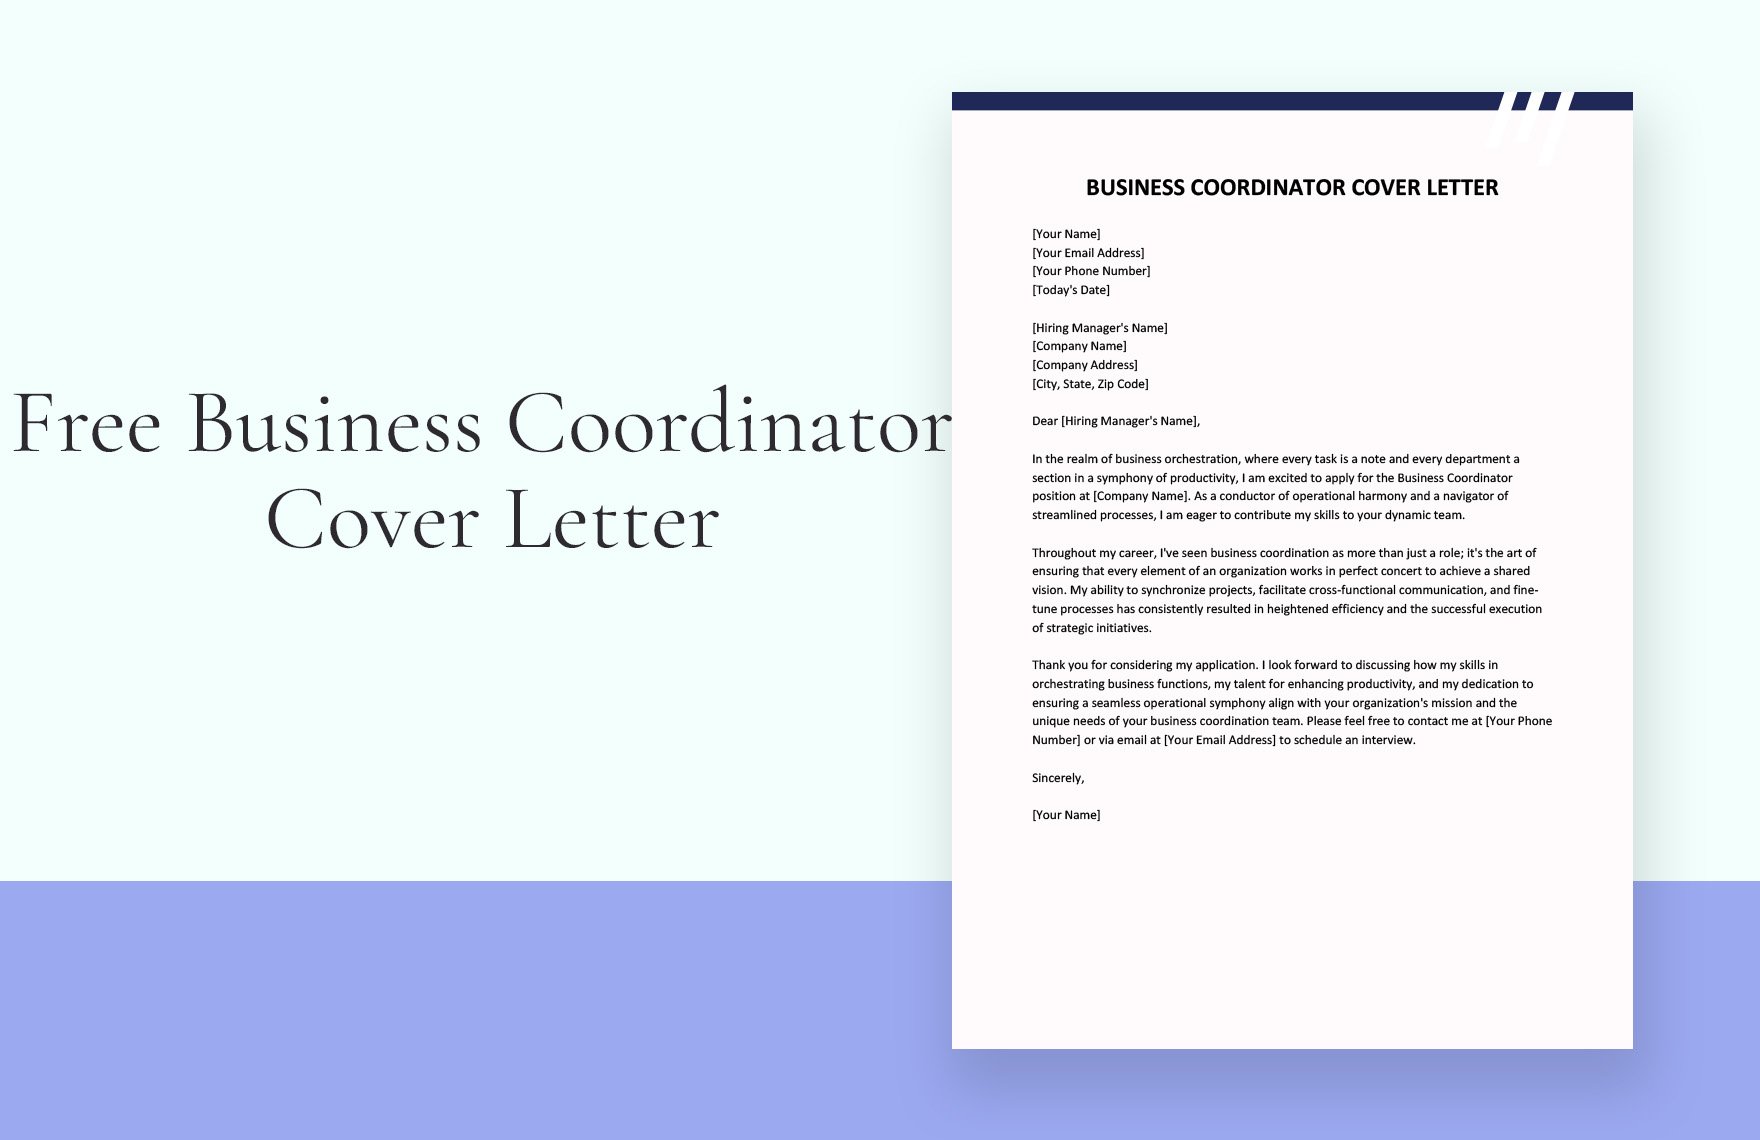 Business Coordinator Cover Letter